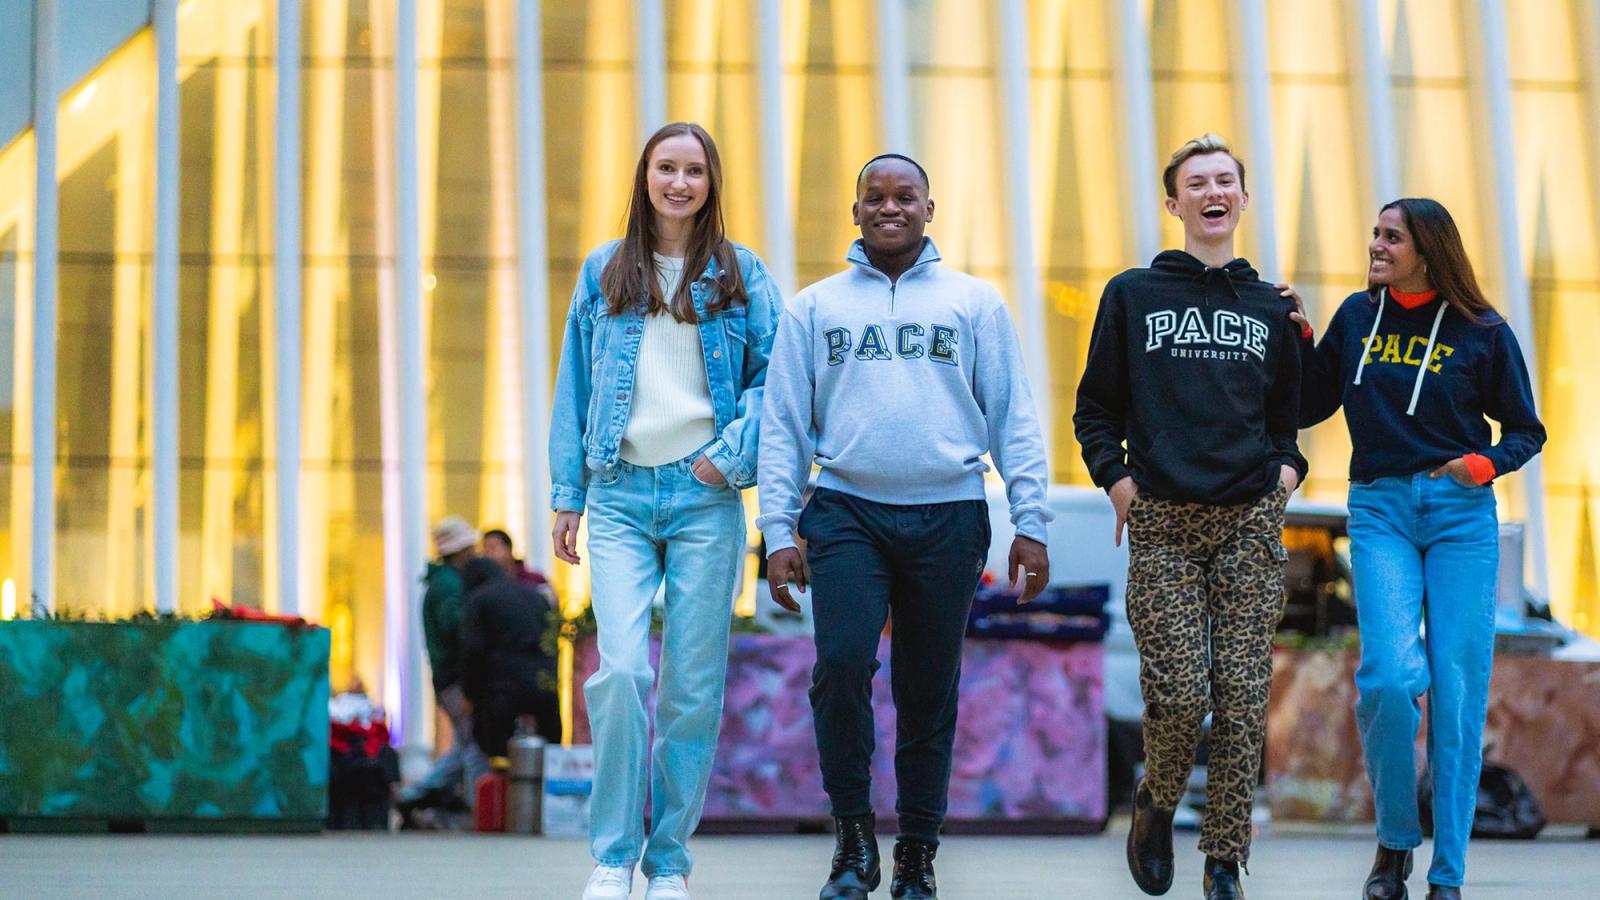 Four Pace students walking in Lower Manhattan